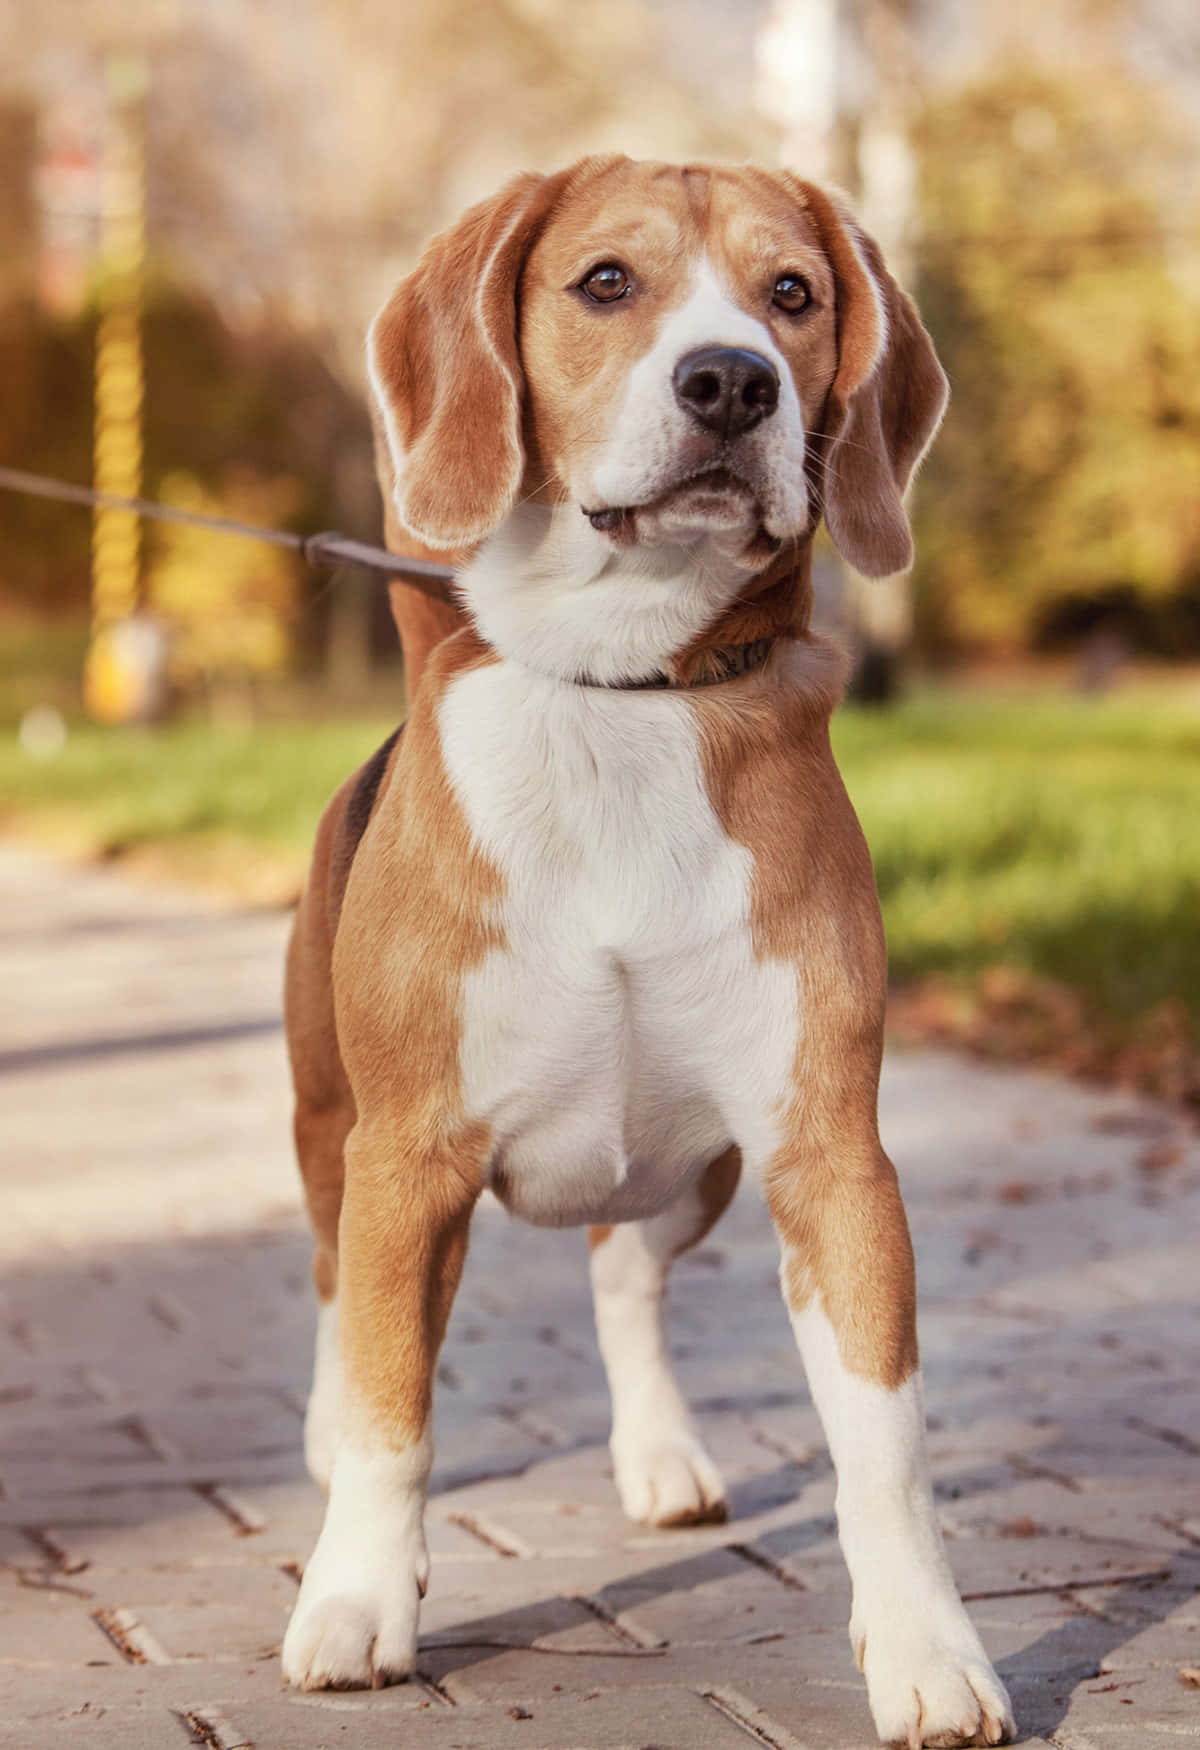 “Sitting Pretty: An adorable beagle puppy adorably posing for the camera. ”